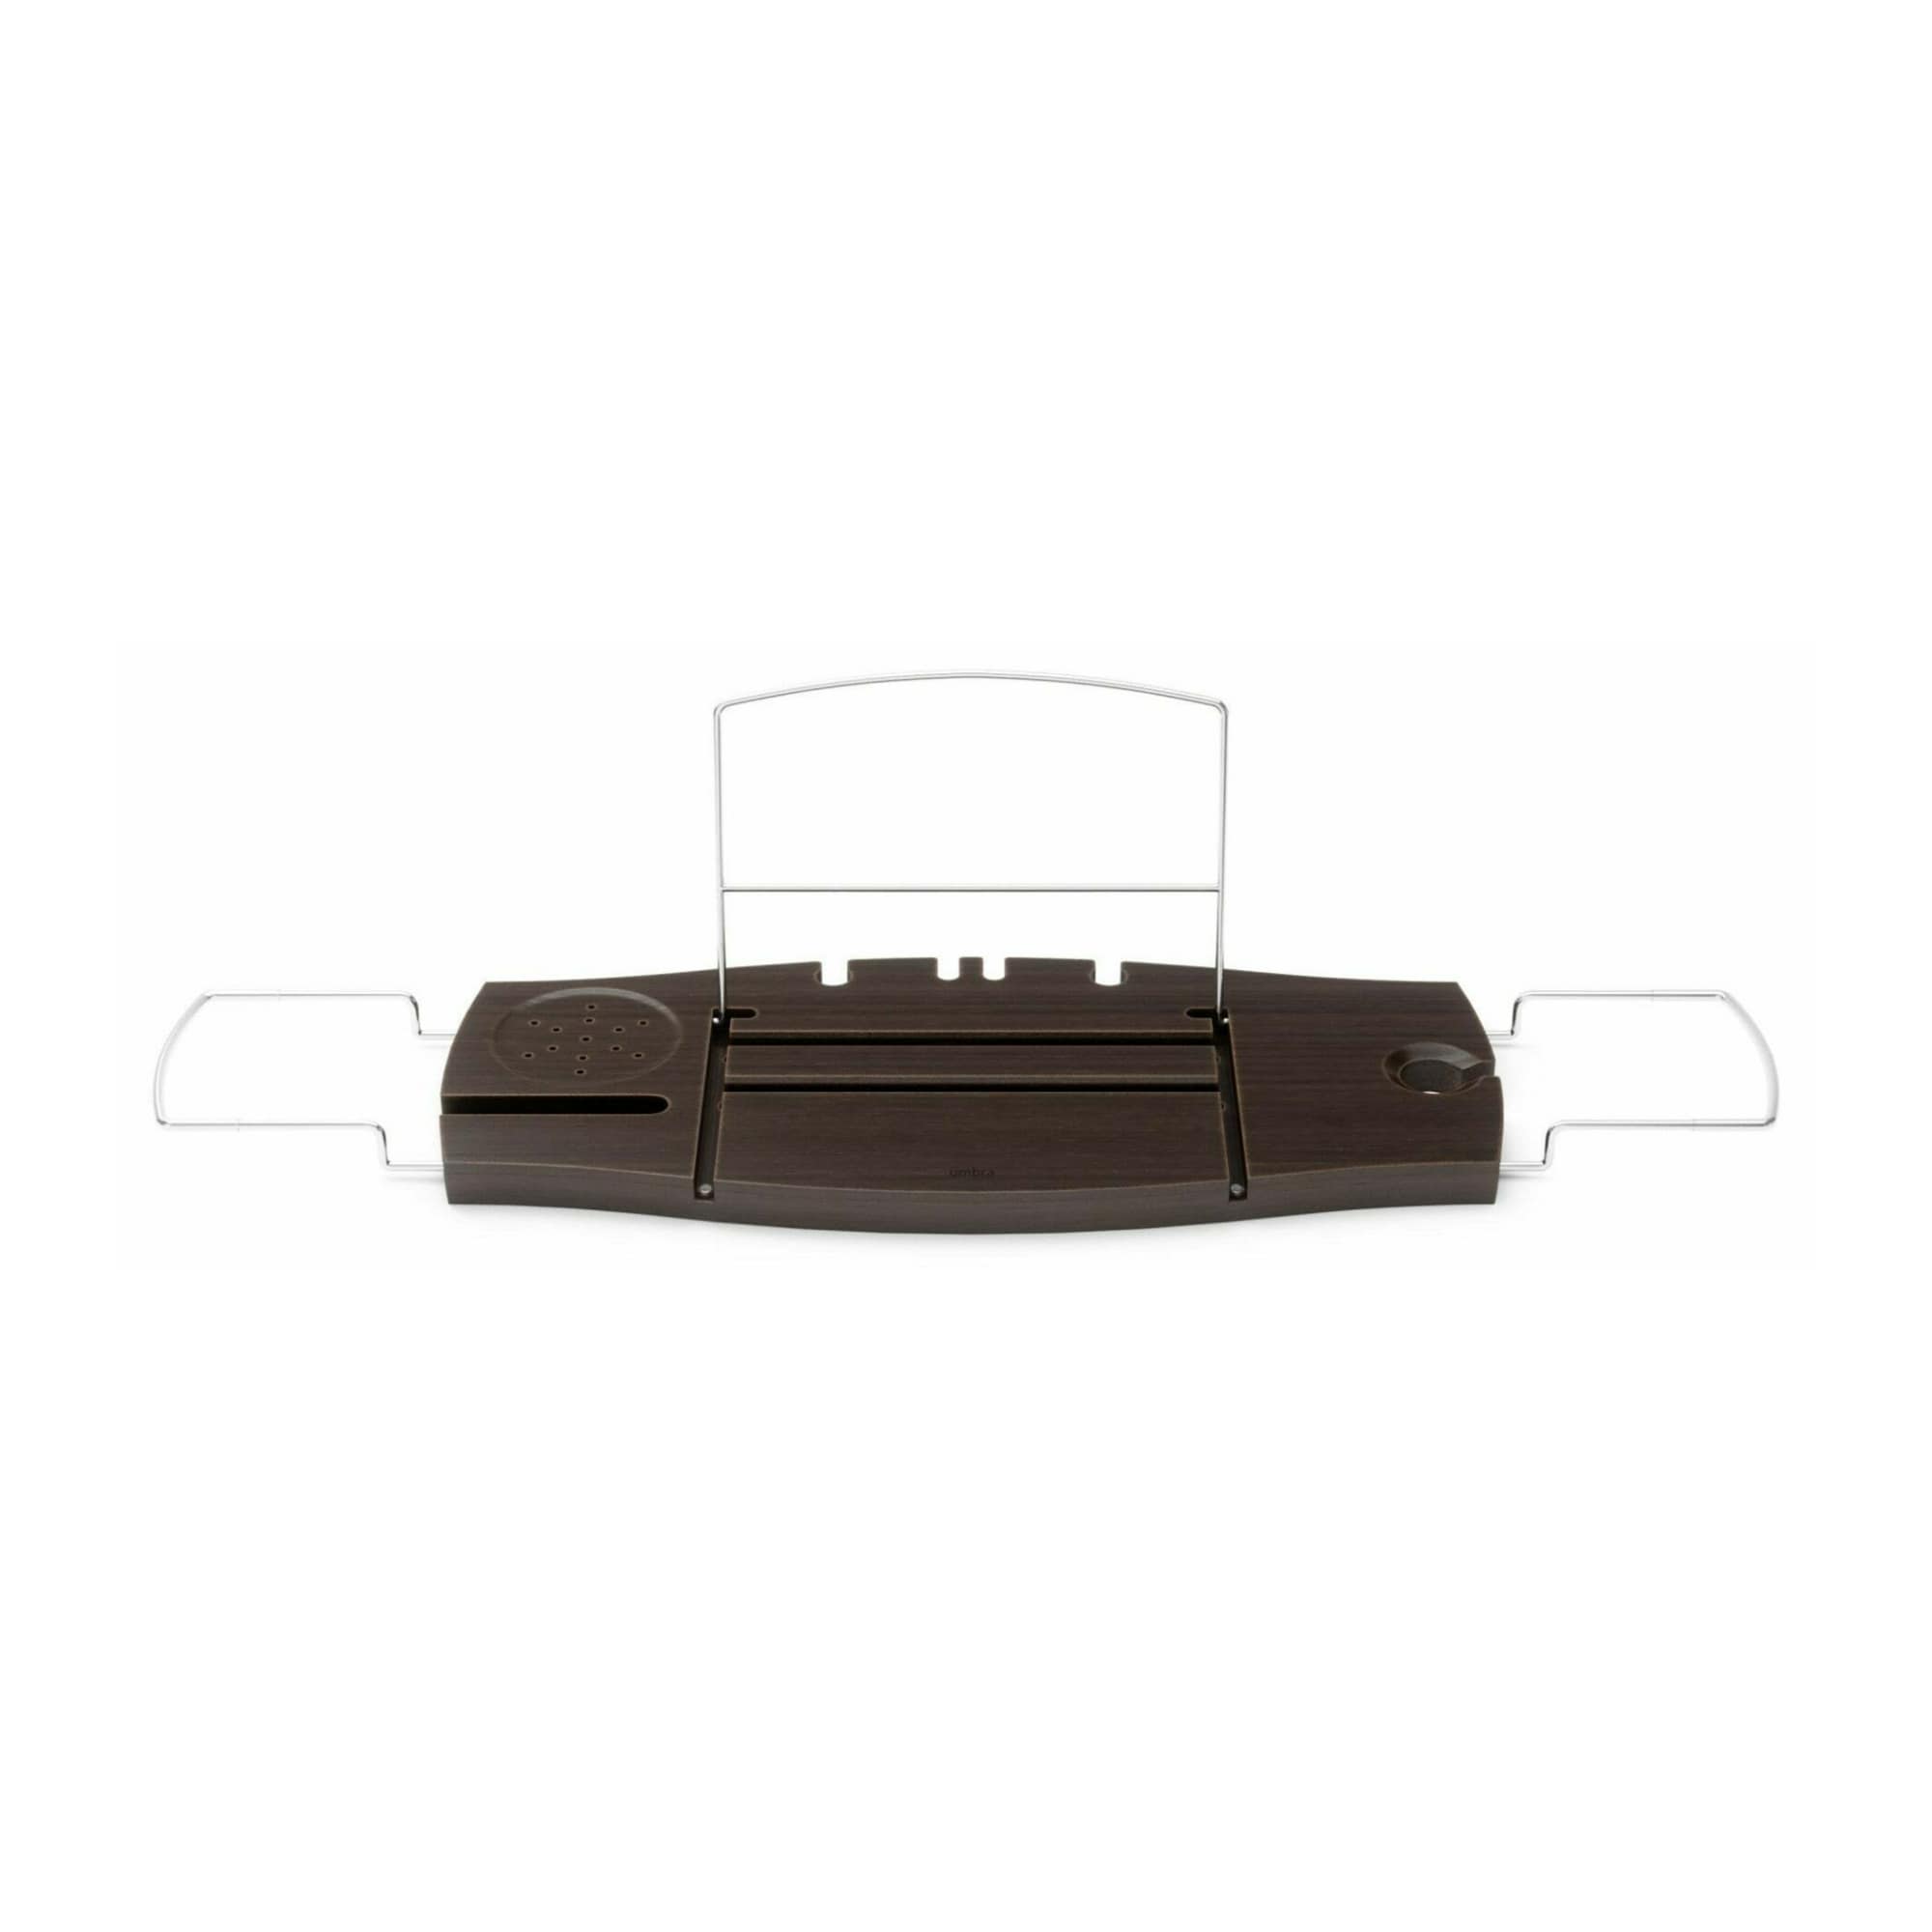 https://ak1.ostkcdn.com/images/products/is/images/direct/6829cbdf2cc8485e04a1c4e864aee6e2a045e8d9/Umbra-Aquala-Bath-Caddy-%28Walnut%29.jpg